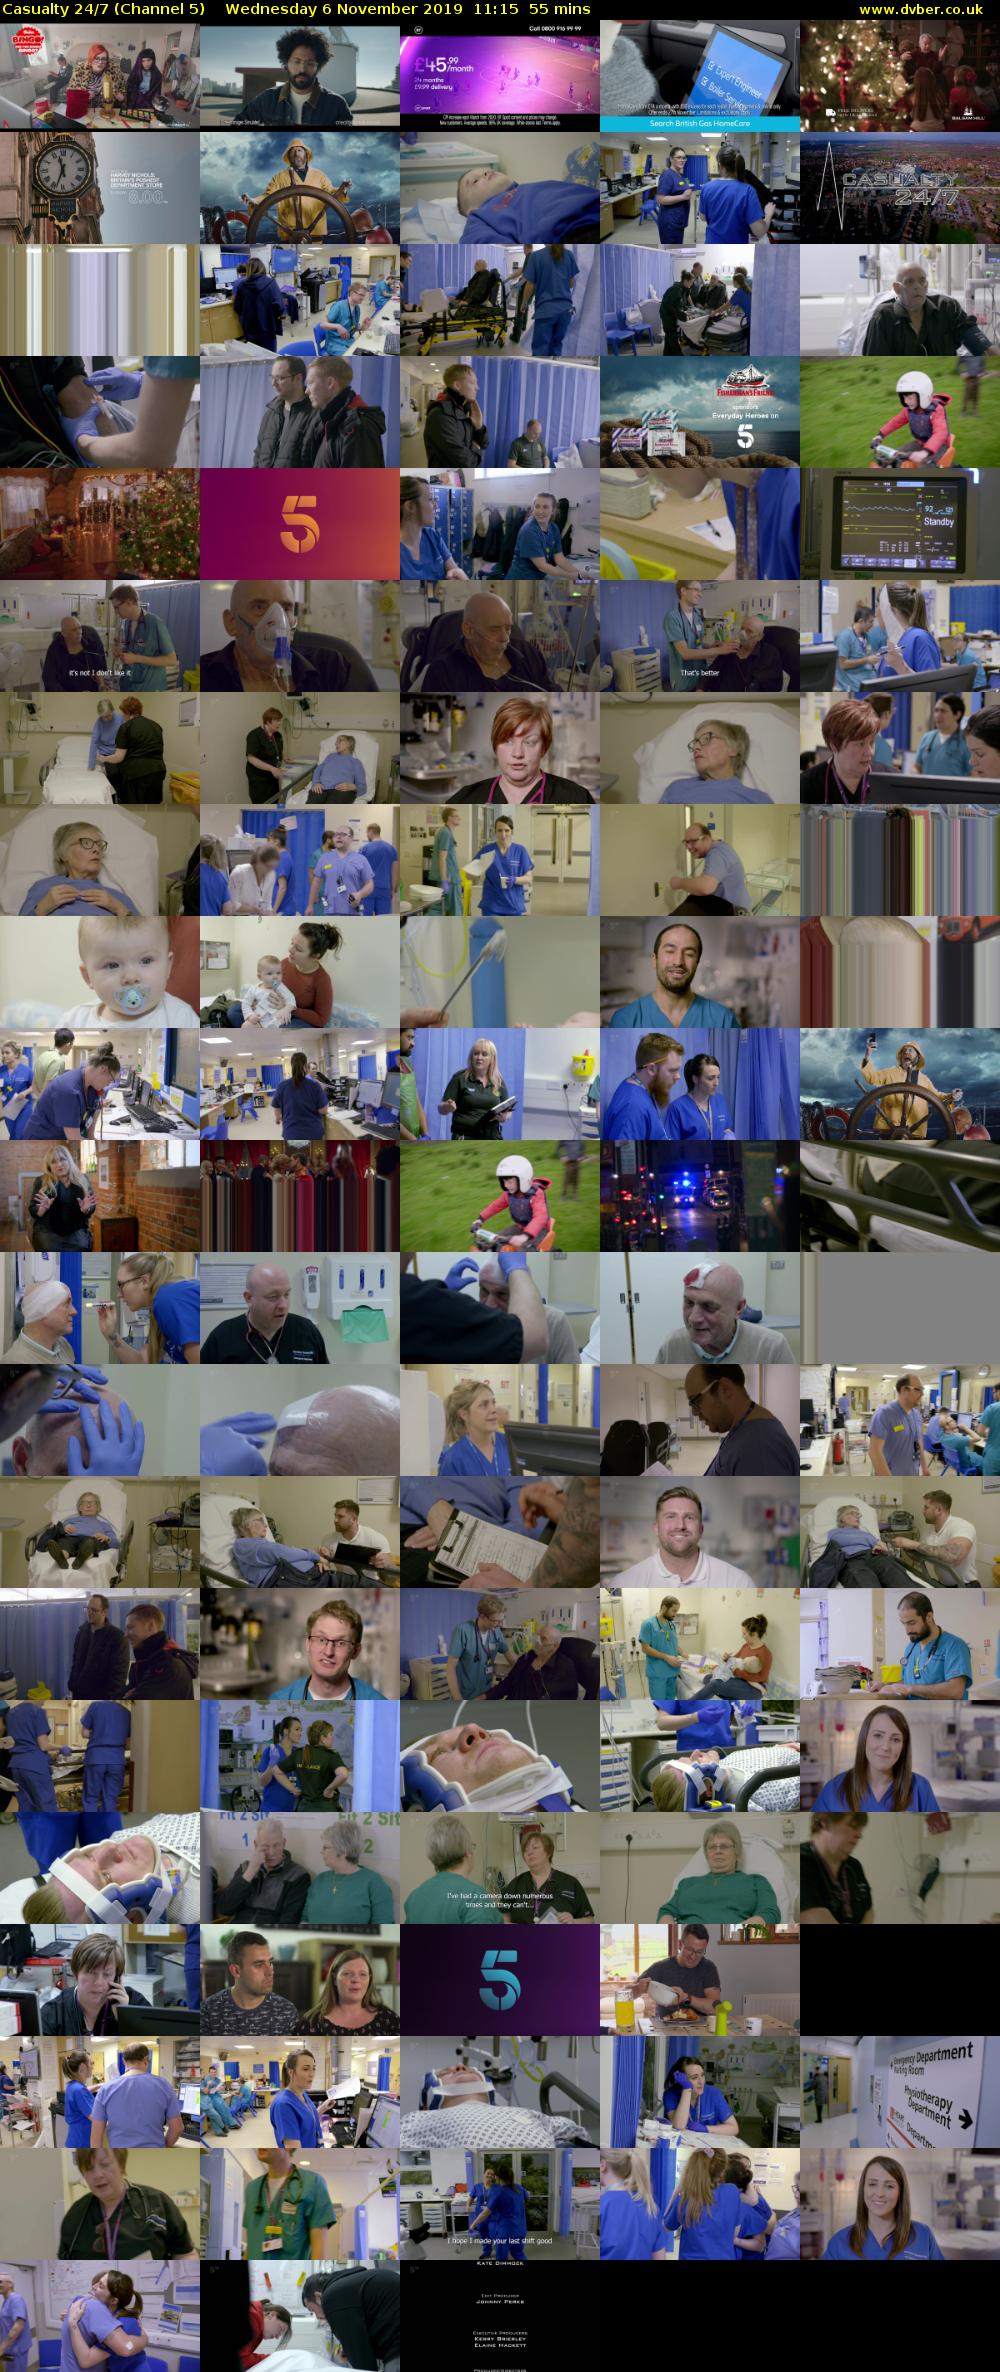 Casualty 24/7 (Channel 5) Wednesday 6 November 2019 11:15 - 12:10